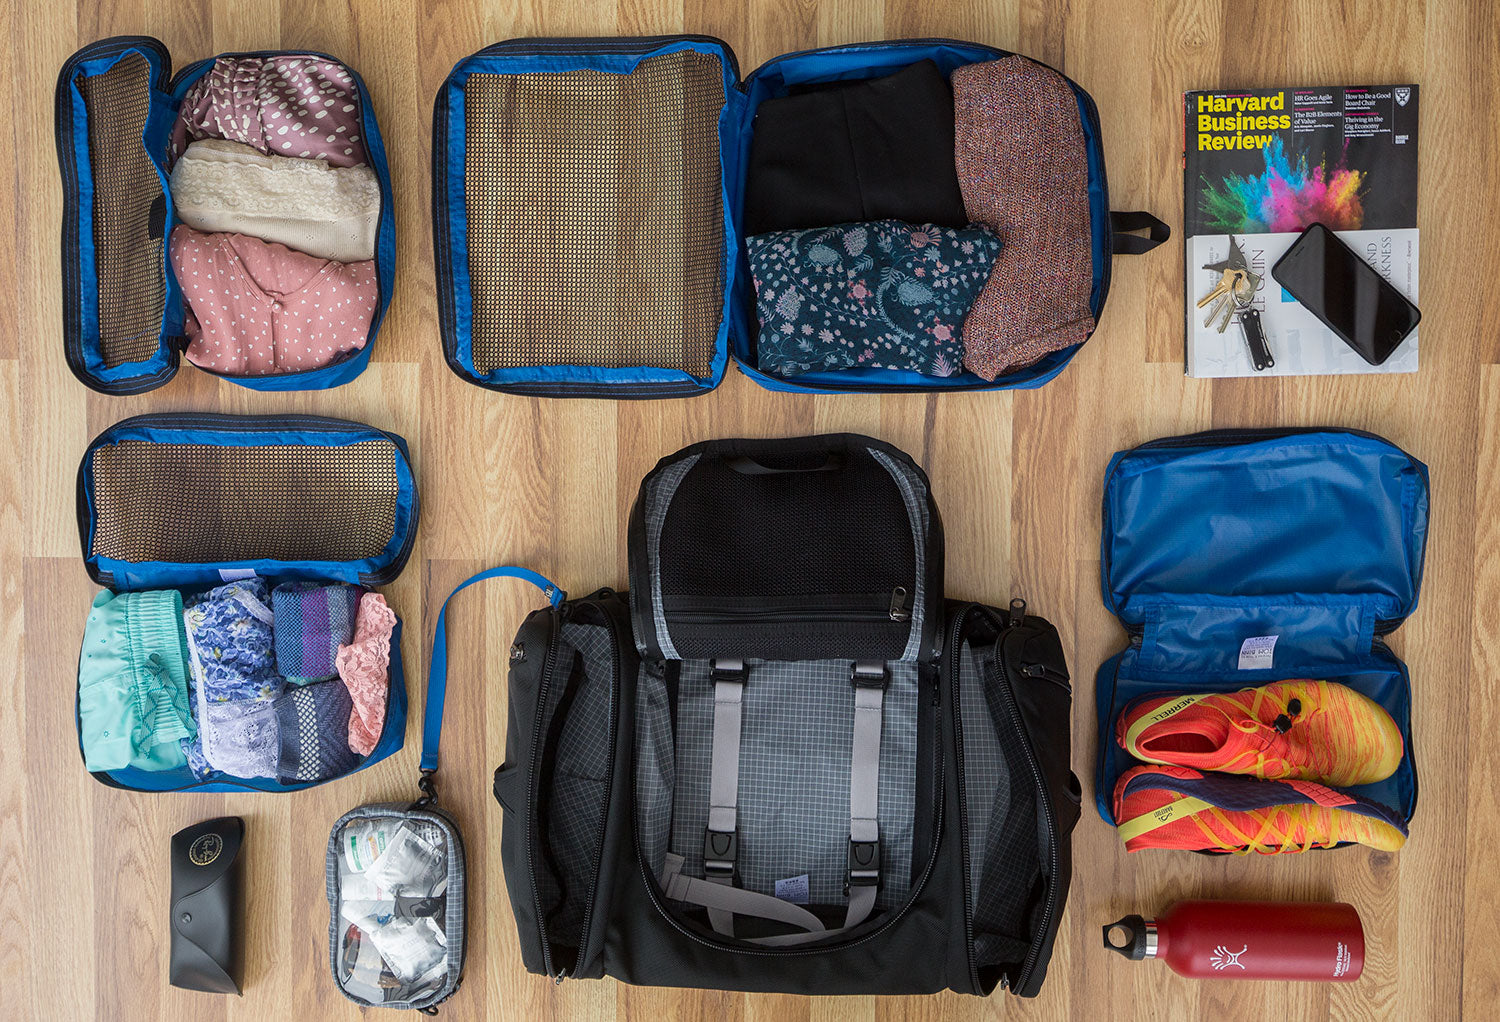 The 5 Ways Packing Cubes Make Packing Easier